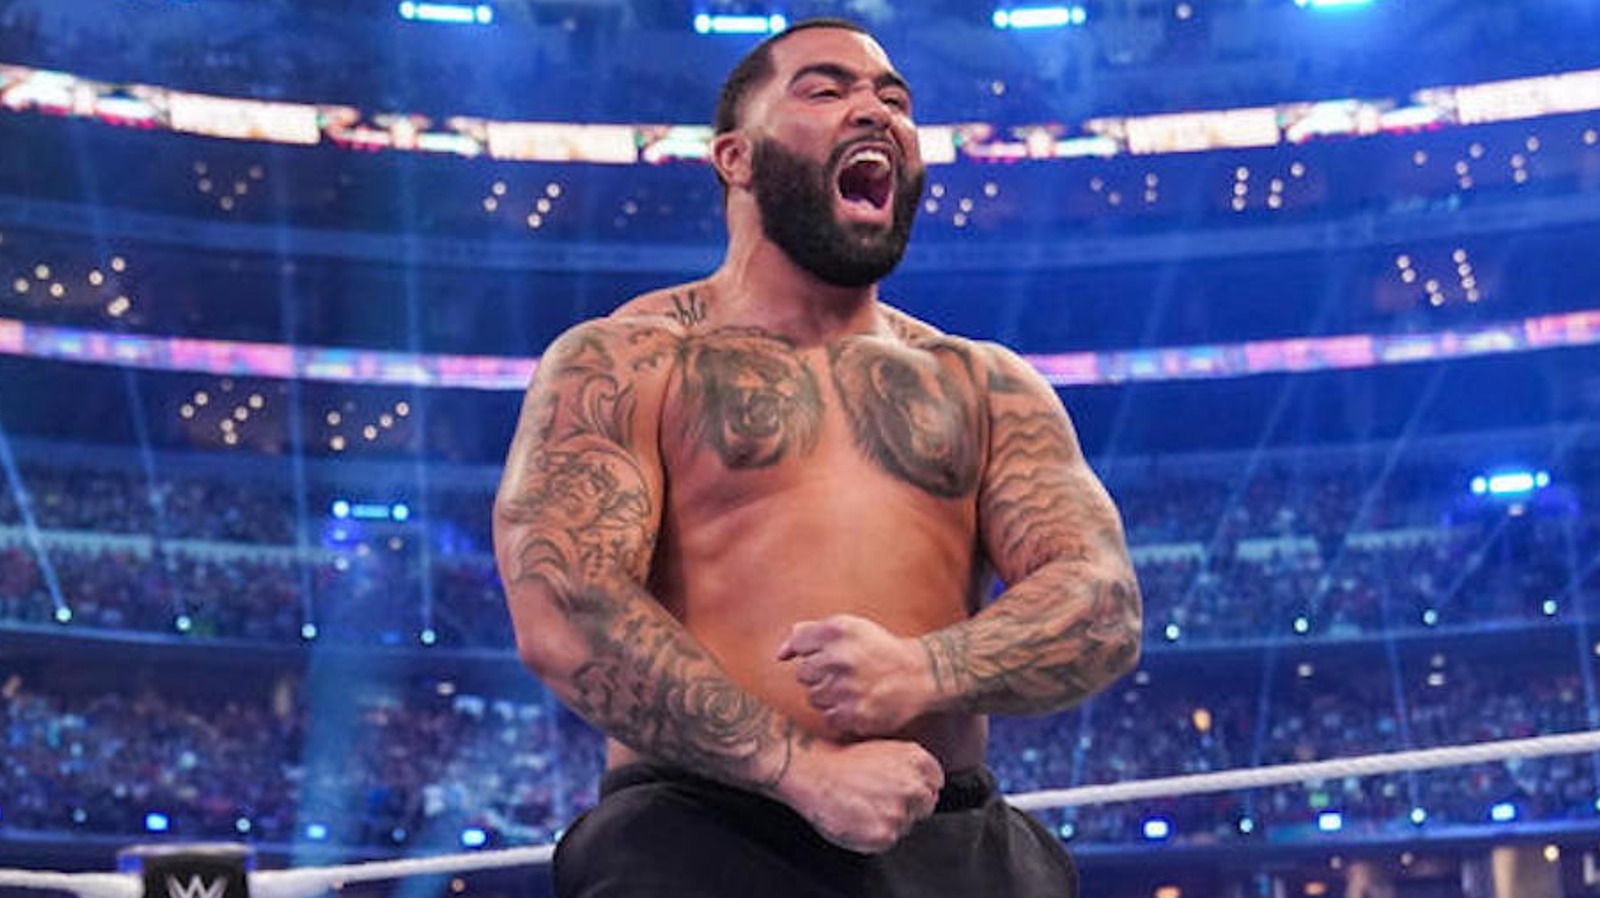 AEW's CM Punk trains in MMA gym with ex-WWE star Malakai Black and his wife  Zelina Vega ahead of ring return